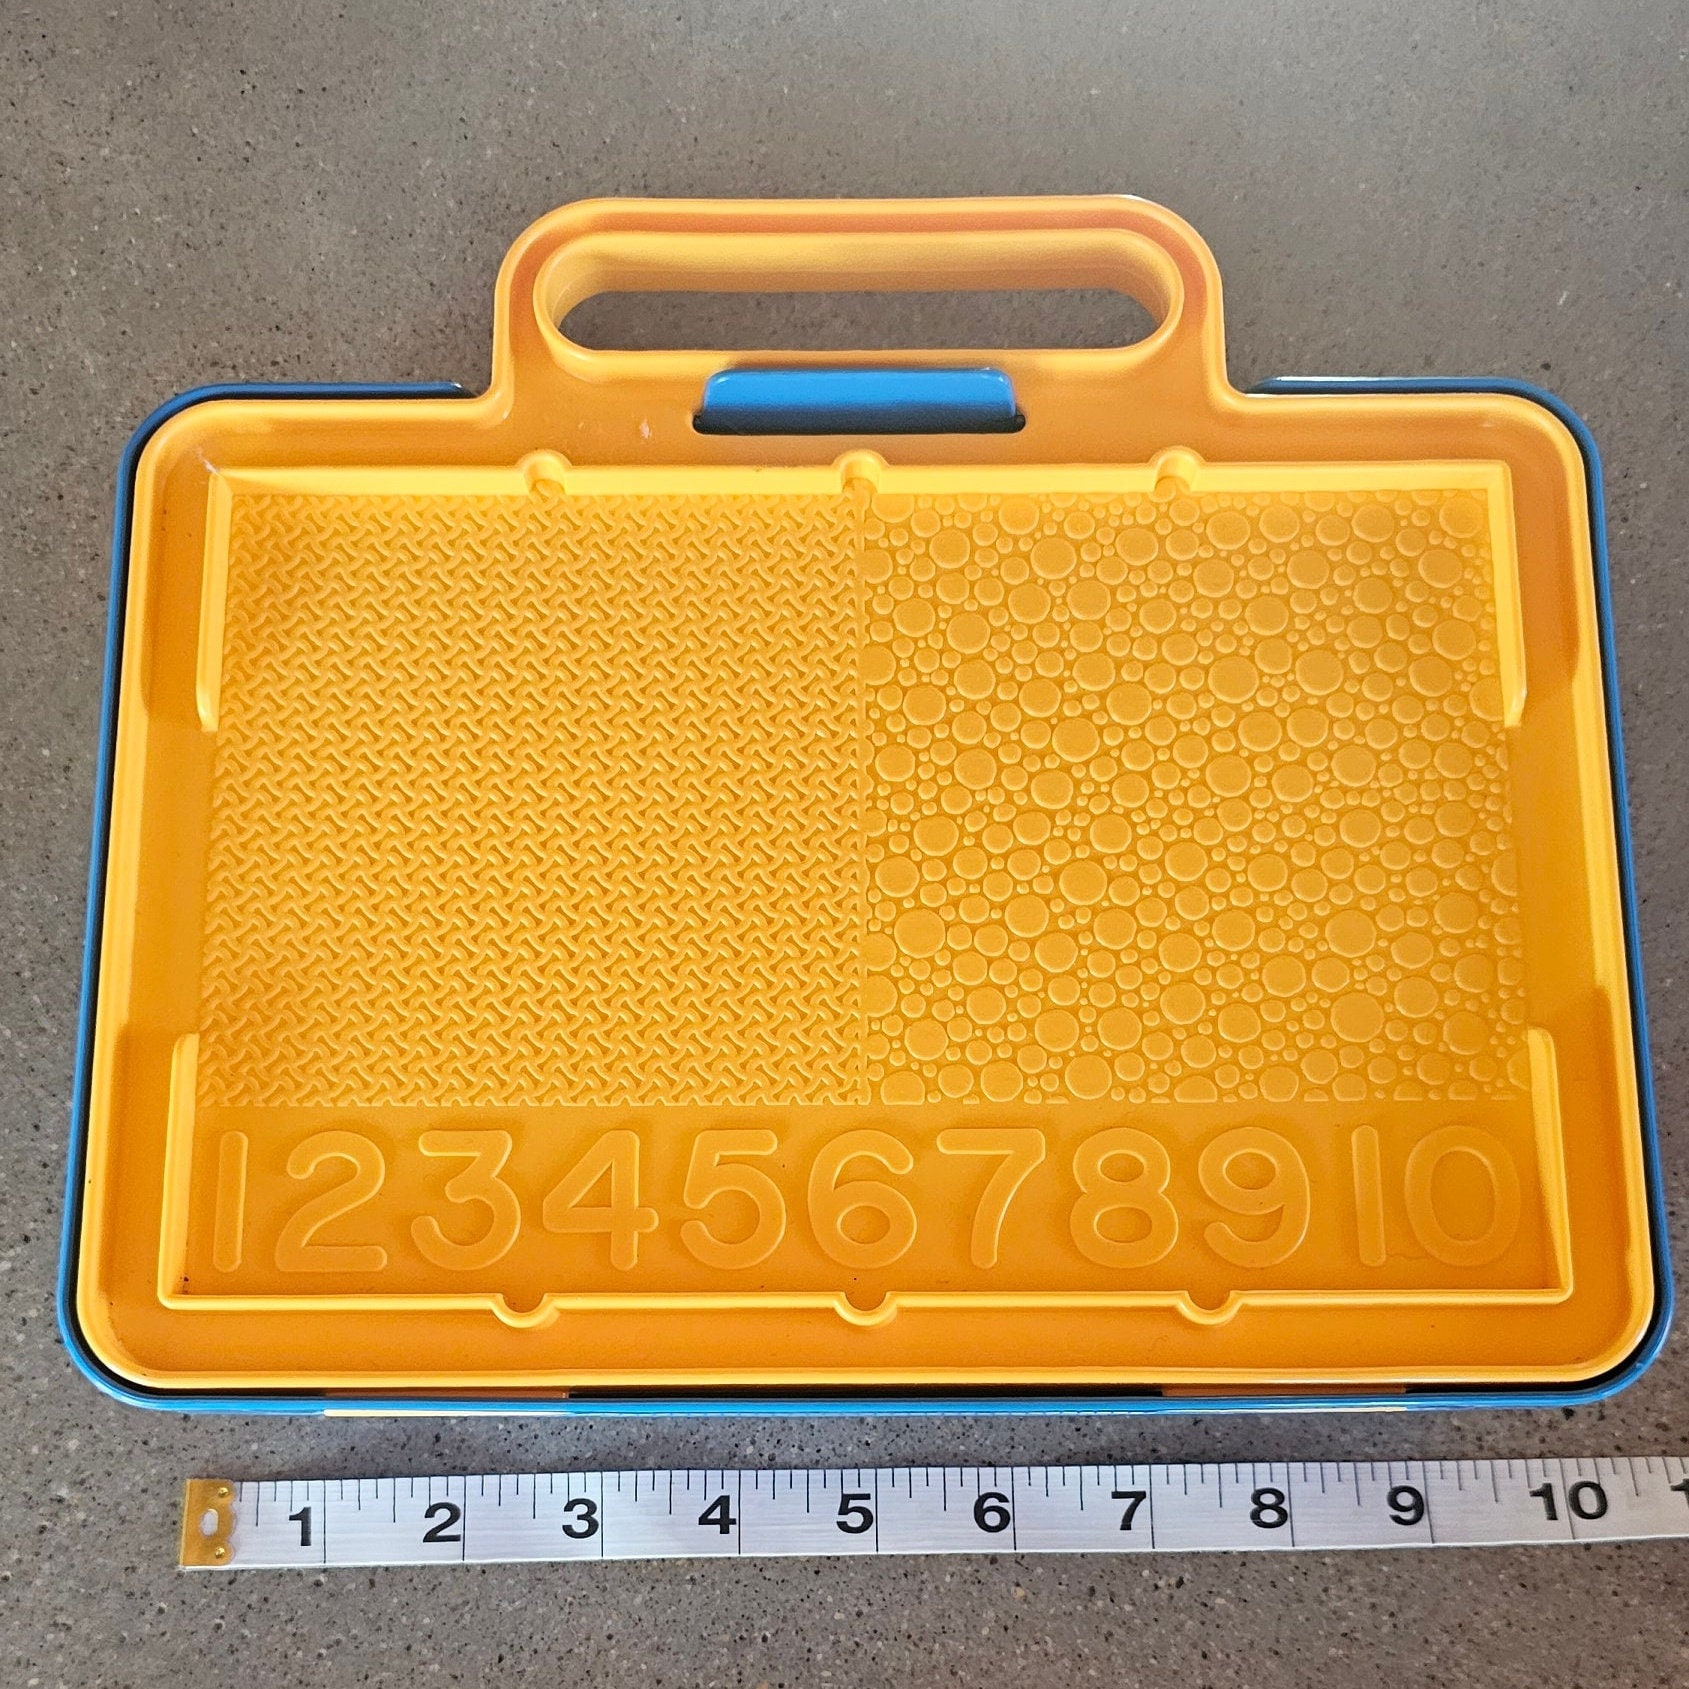 Vintage Tupperware Lunch Box 123 Abc's Yellow